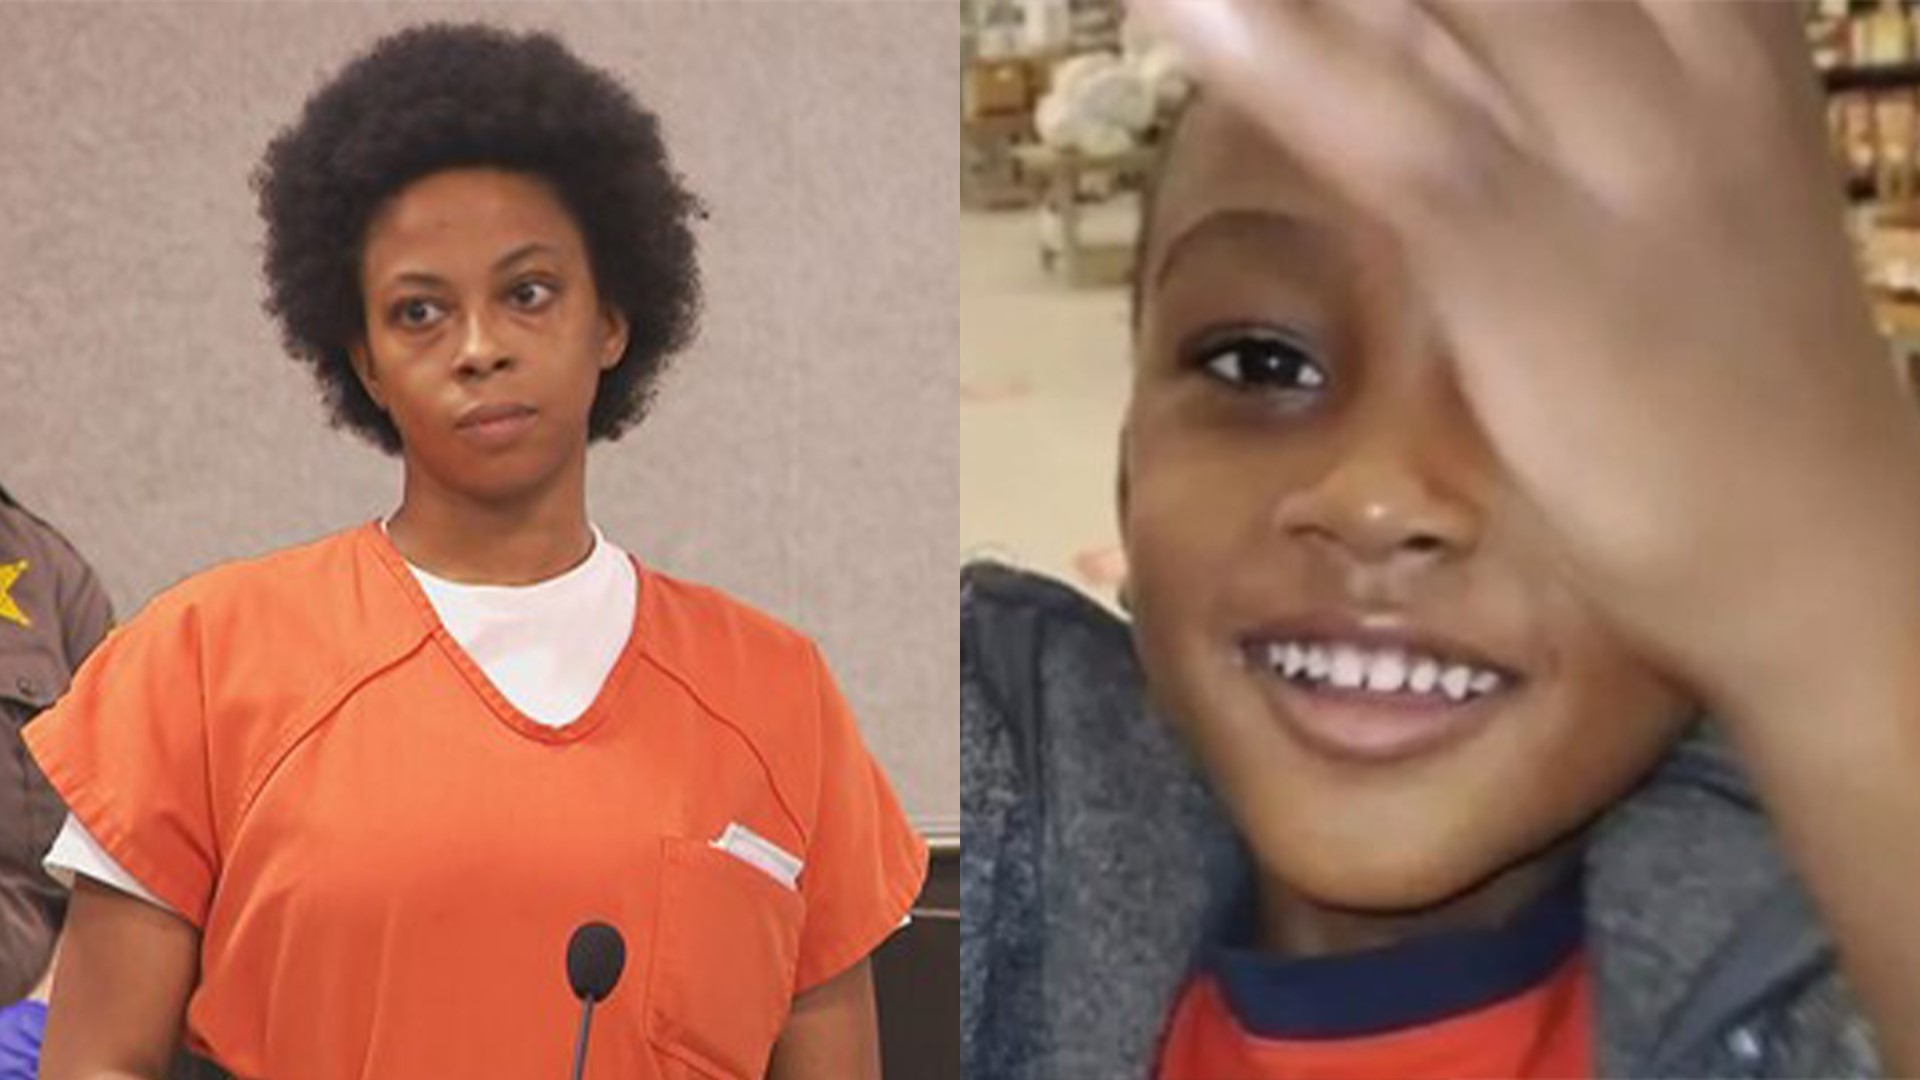 On Wednesday, an Indiana judge ordered Dejaune Anderson undergo psychiatric evaluations to determine if she is competent to stand trial in August.